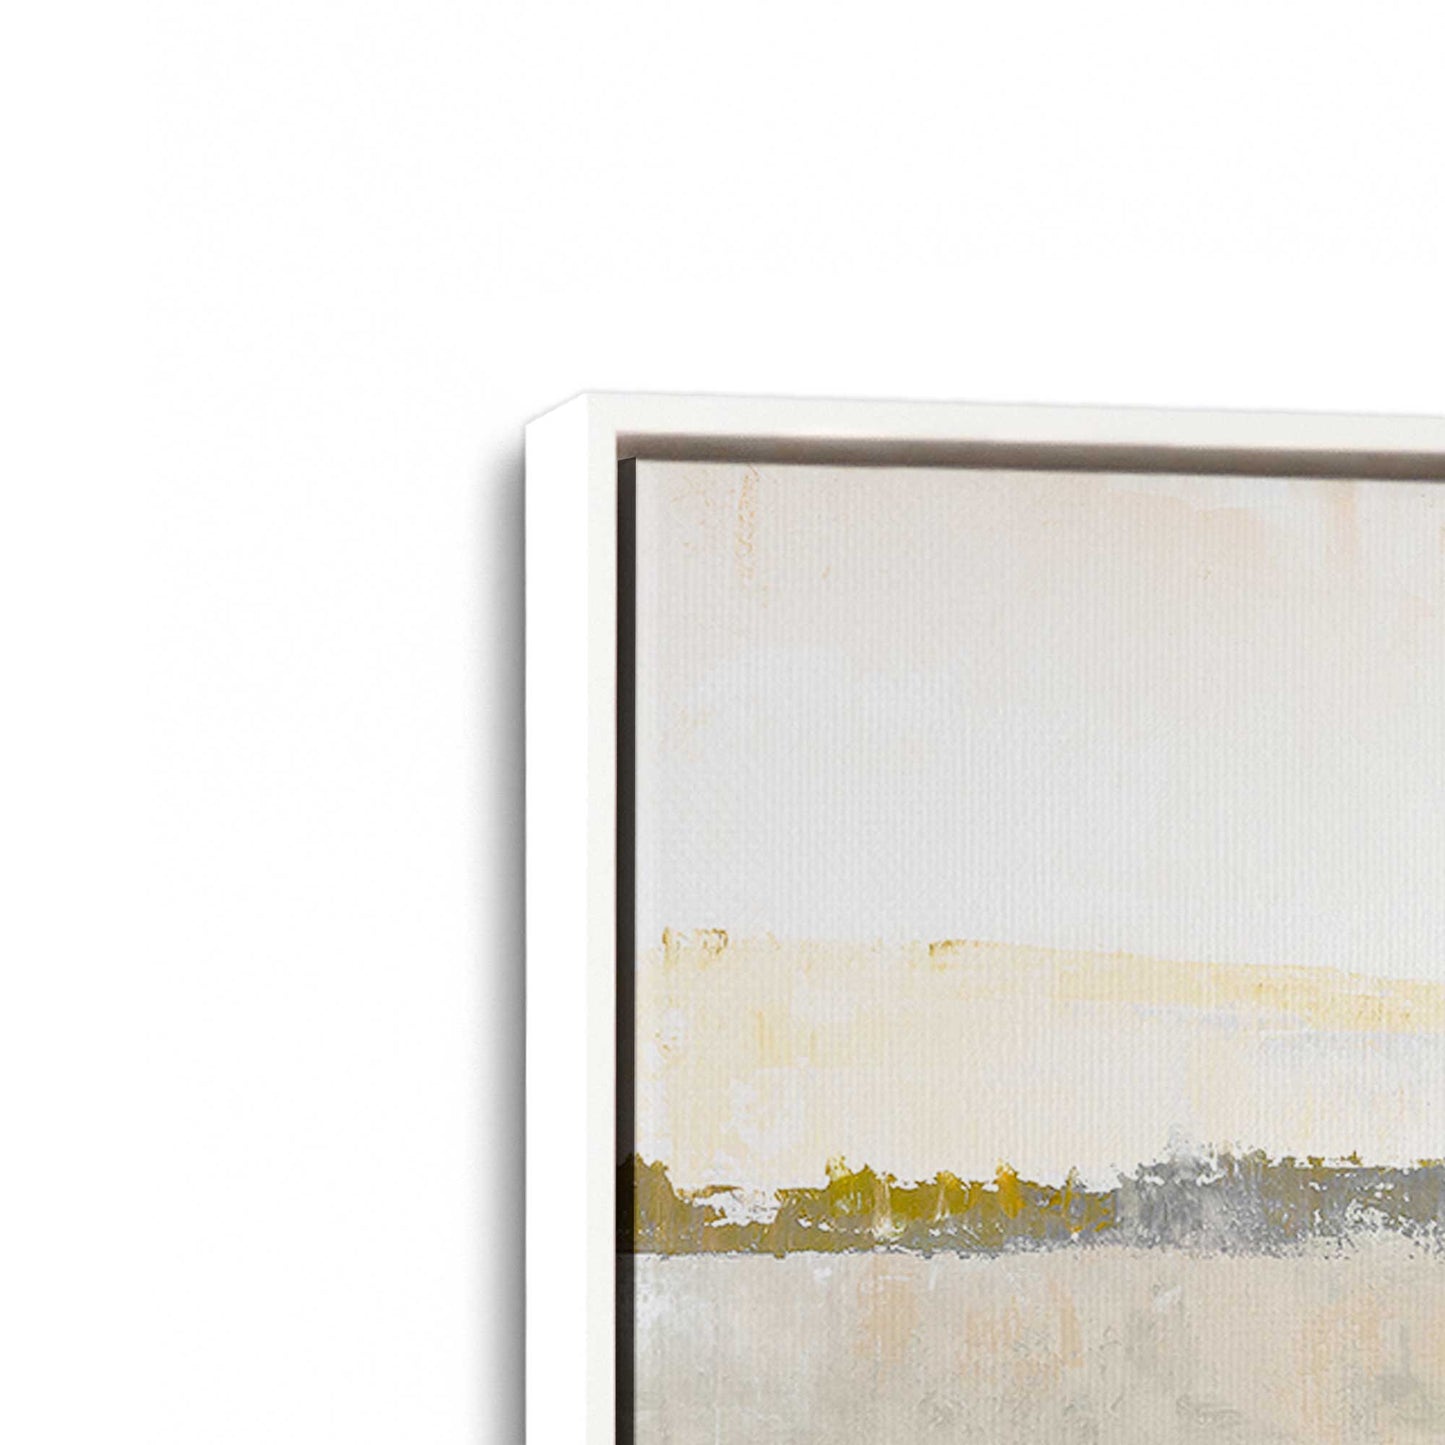 [Color:Opaque White], Picture of the corner of the art